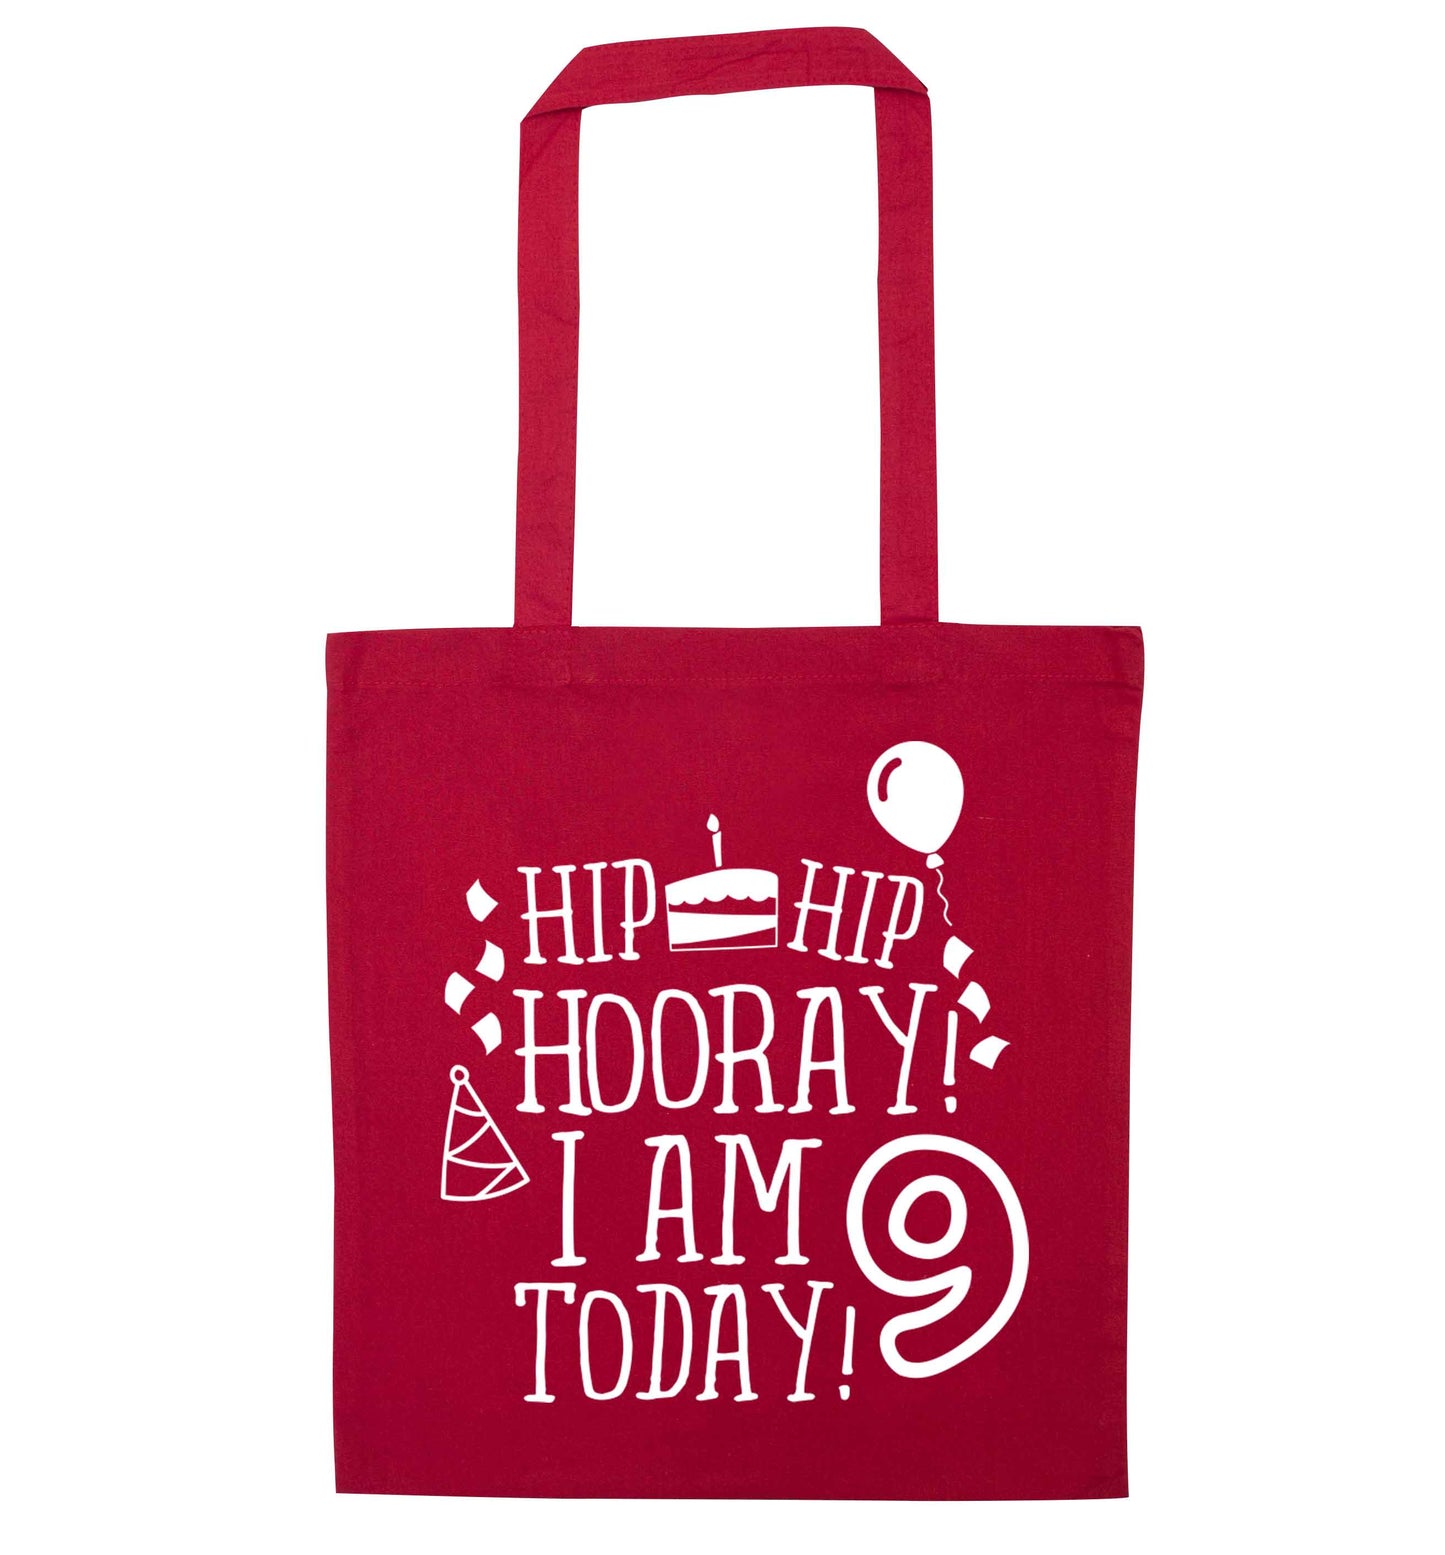 Hip hip hooray I am 9 today! red tote bag